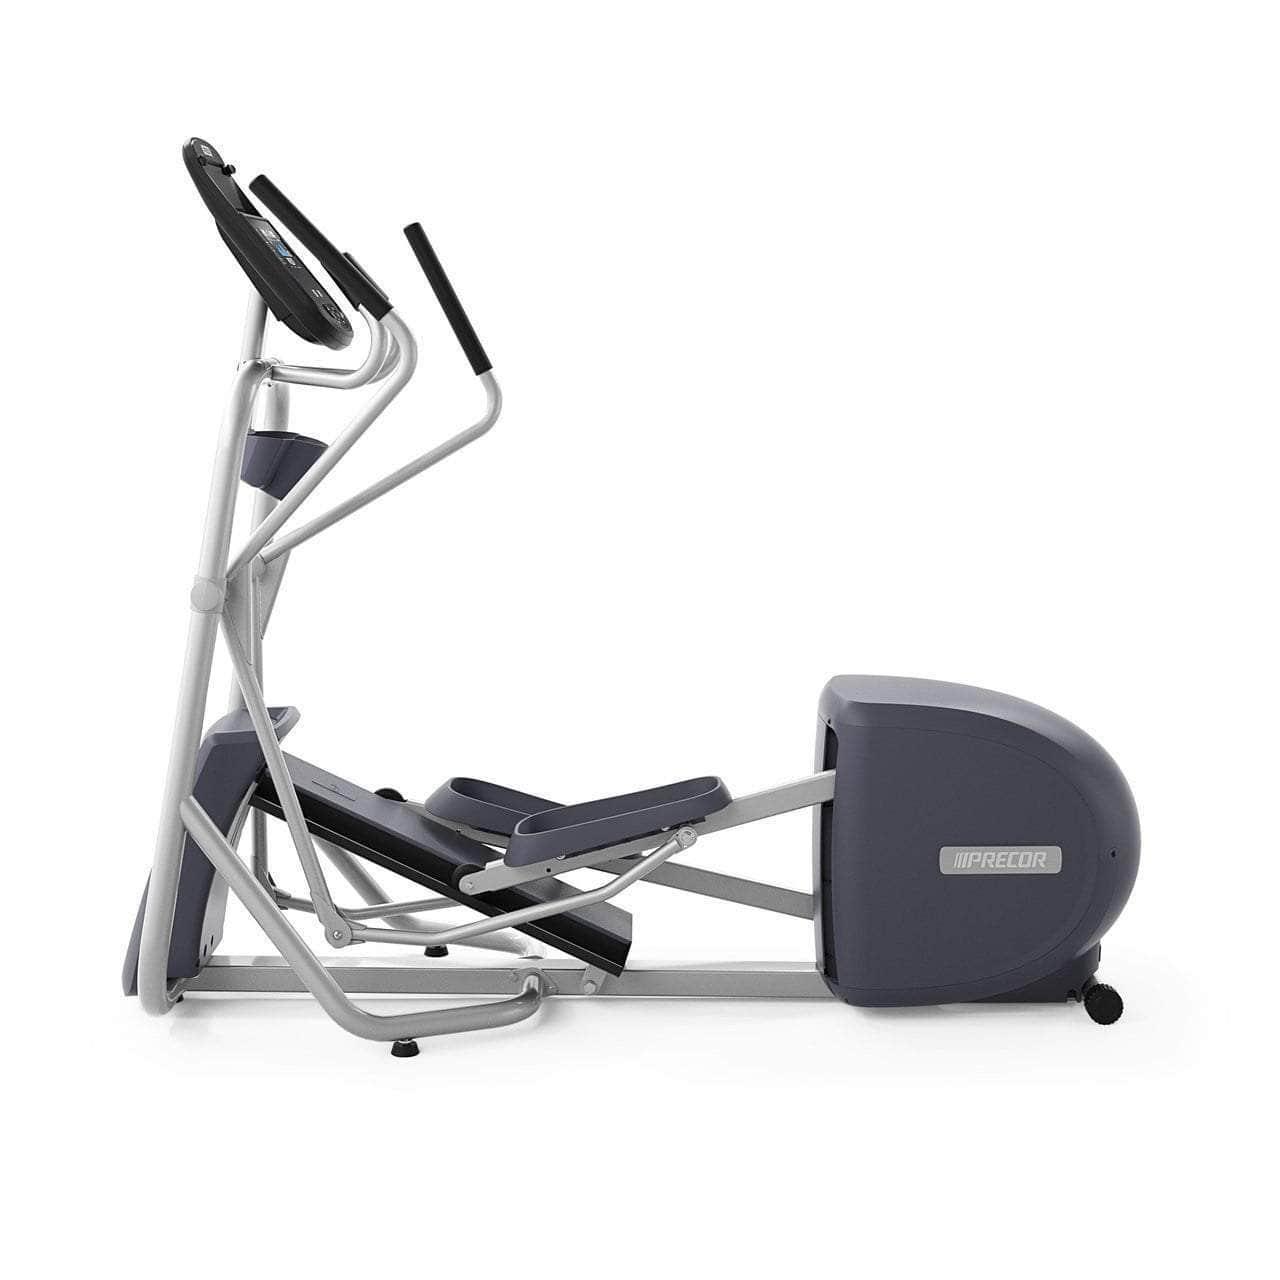 Buy Precor Discovery Series Chest Press Online